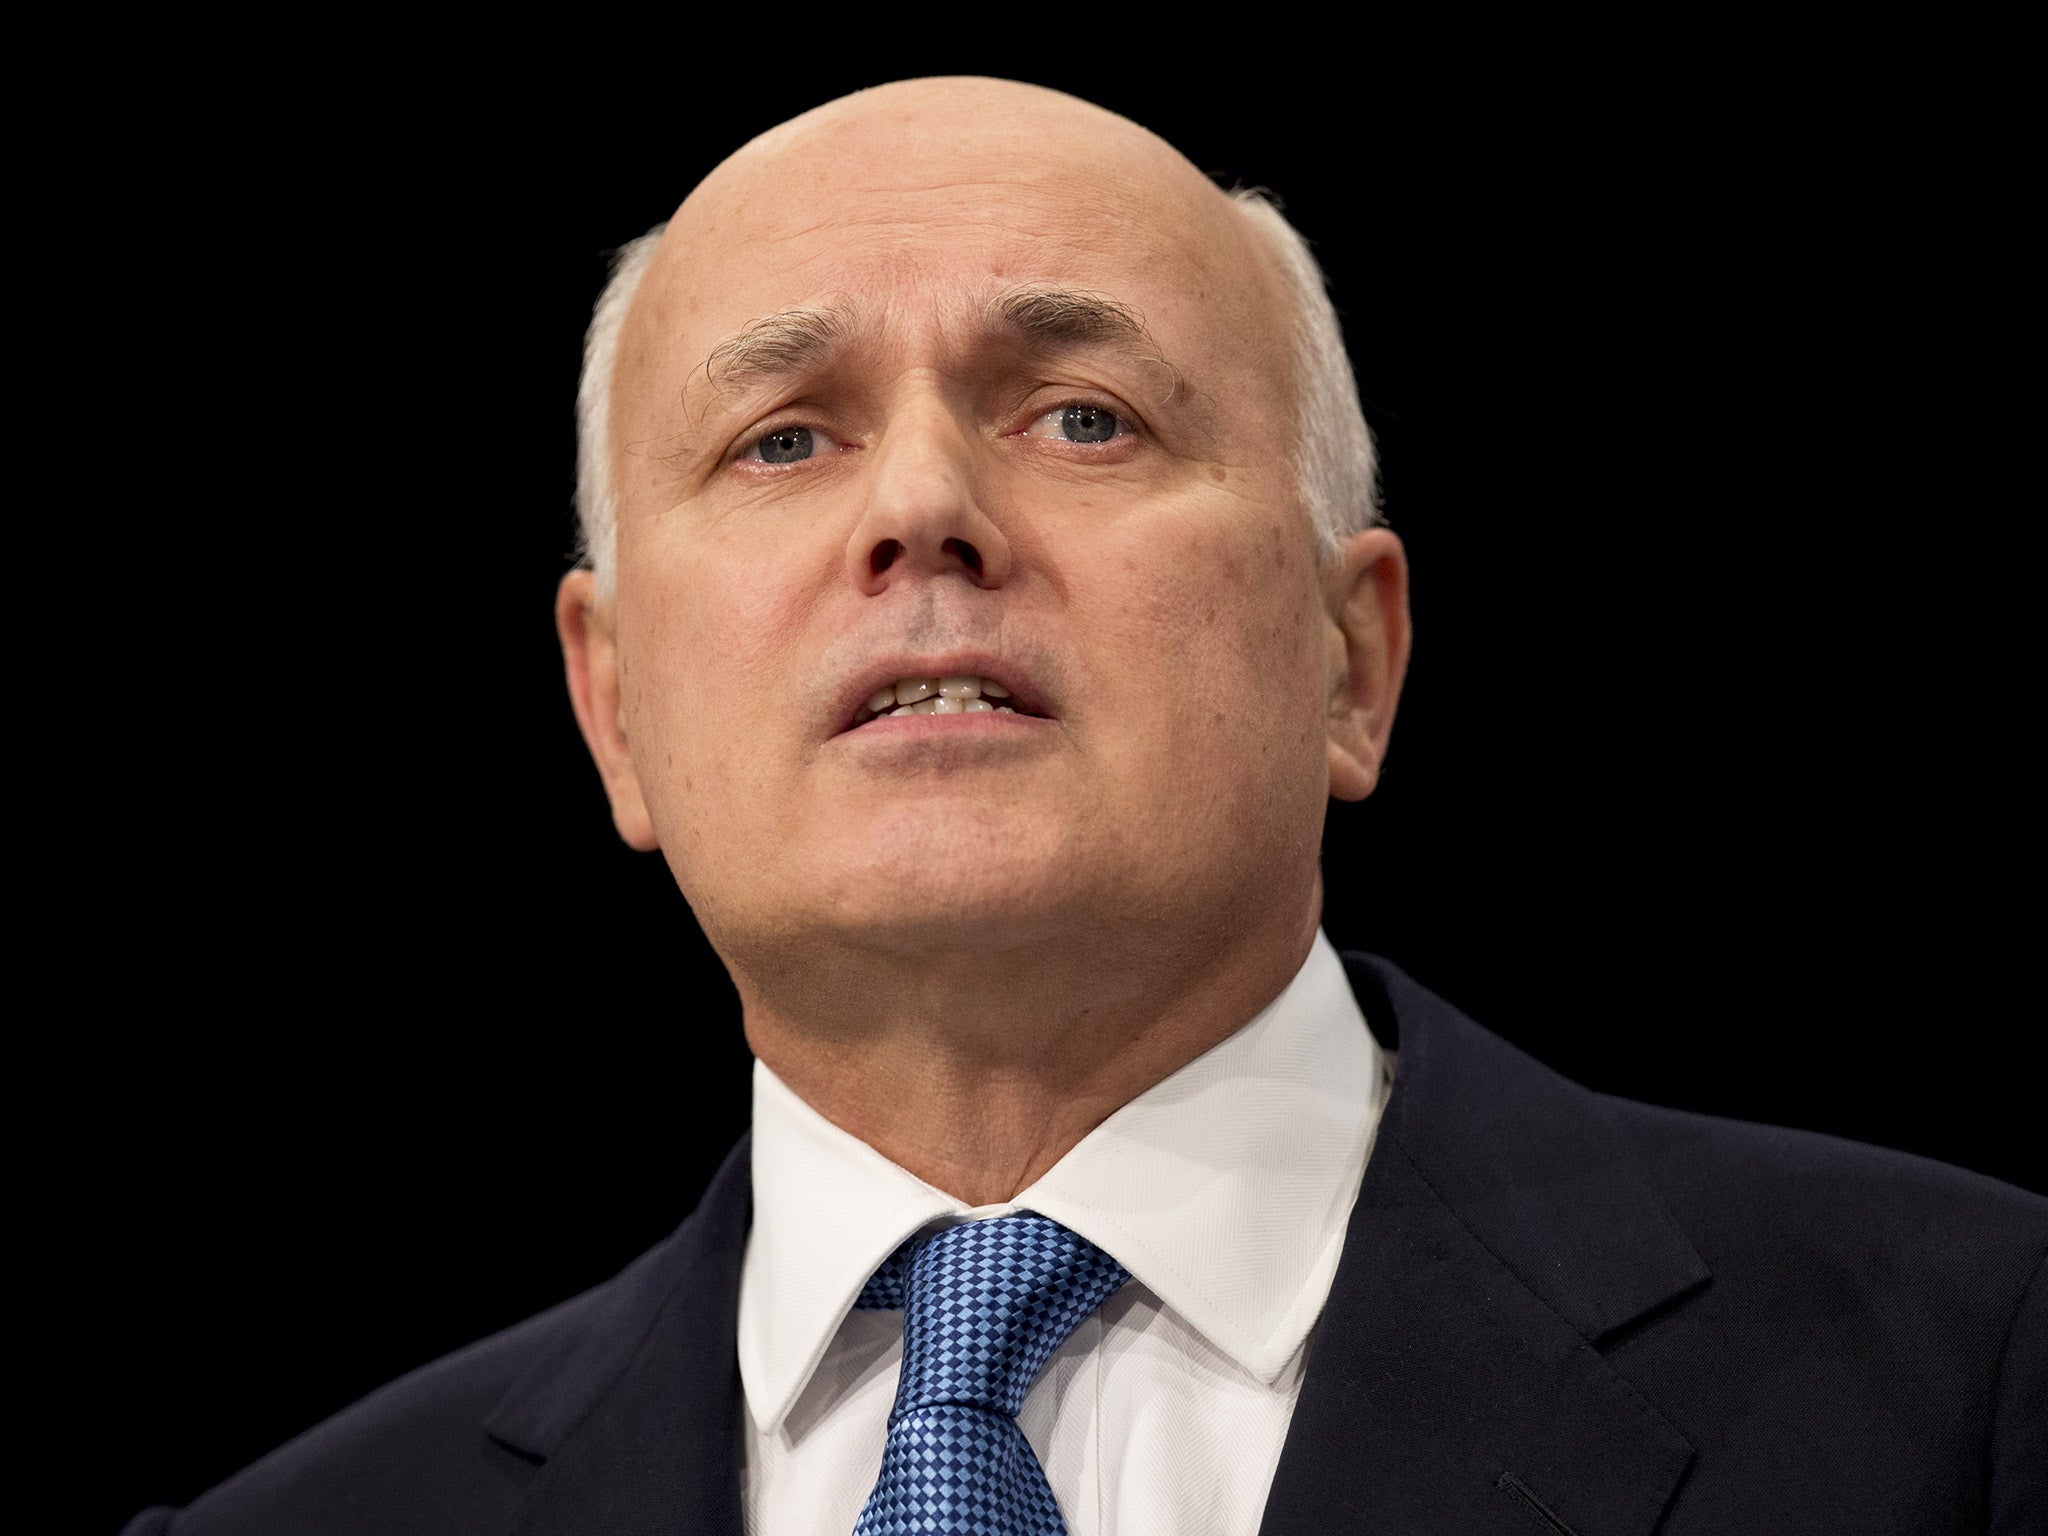 More than 1,400 civil servants working for the DWP said they had experienced discrimination, harassment or bullying on the grounds of a disability